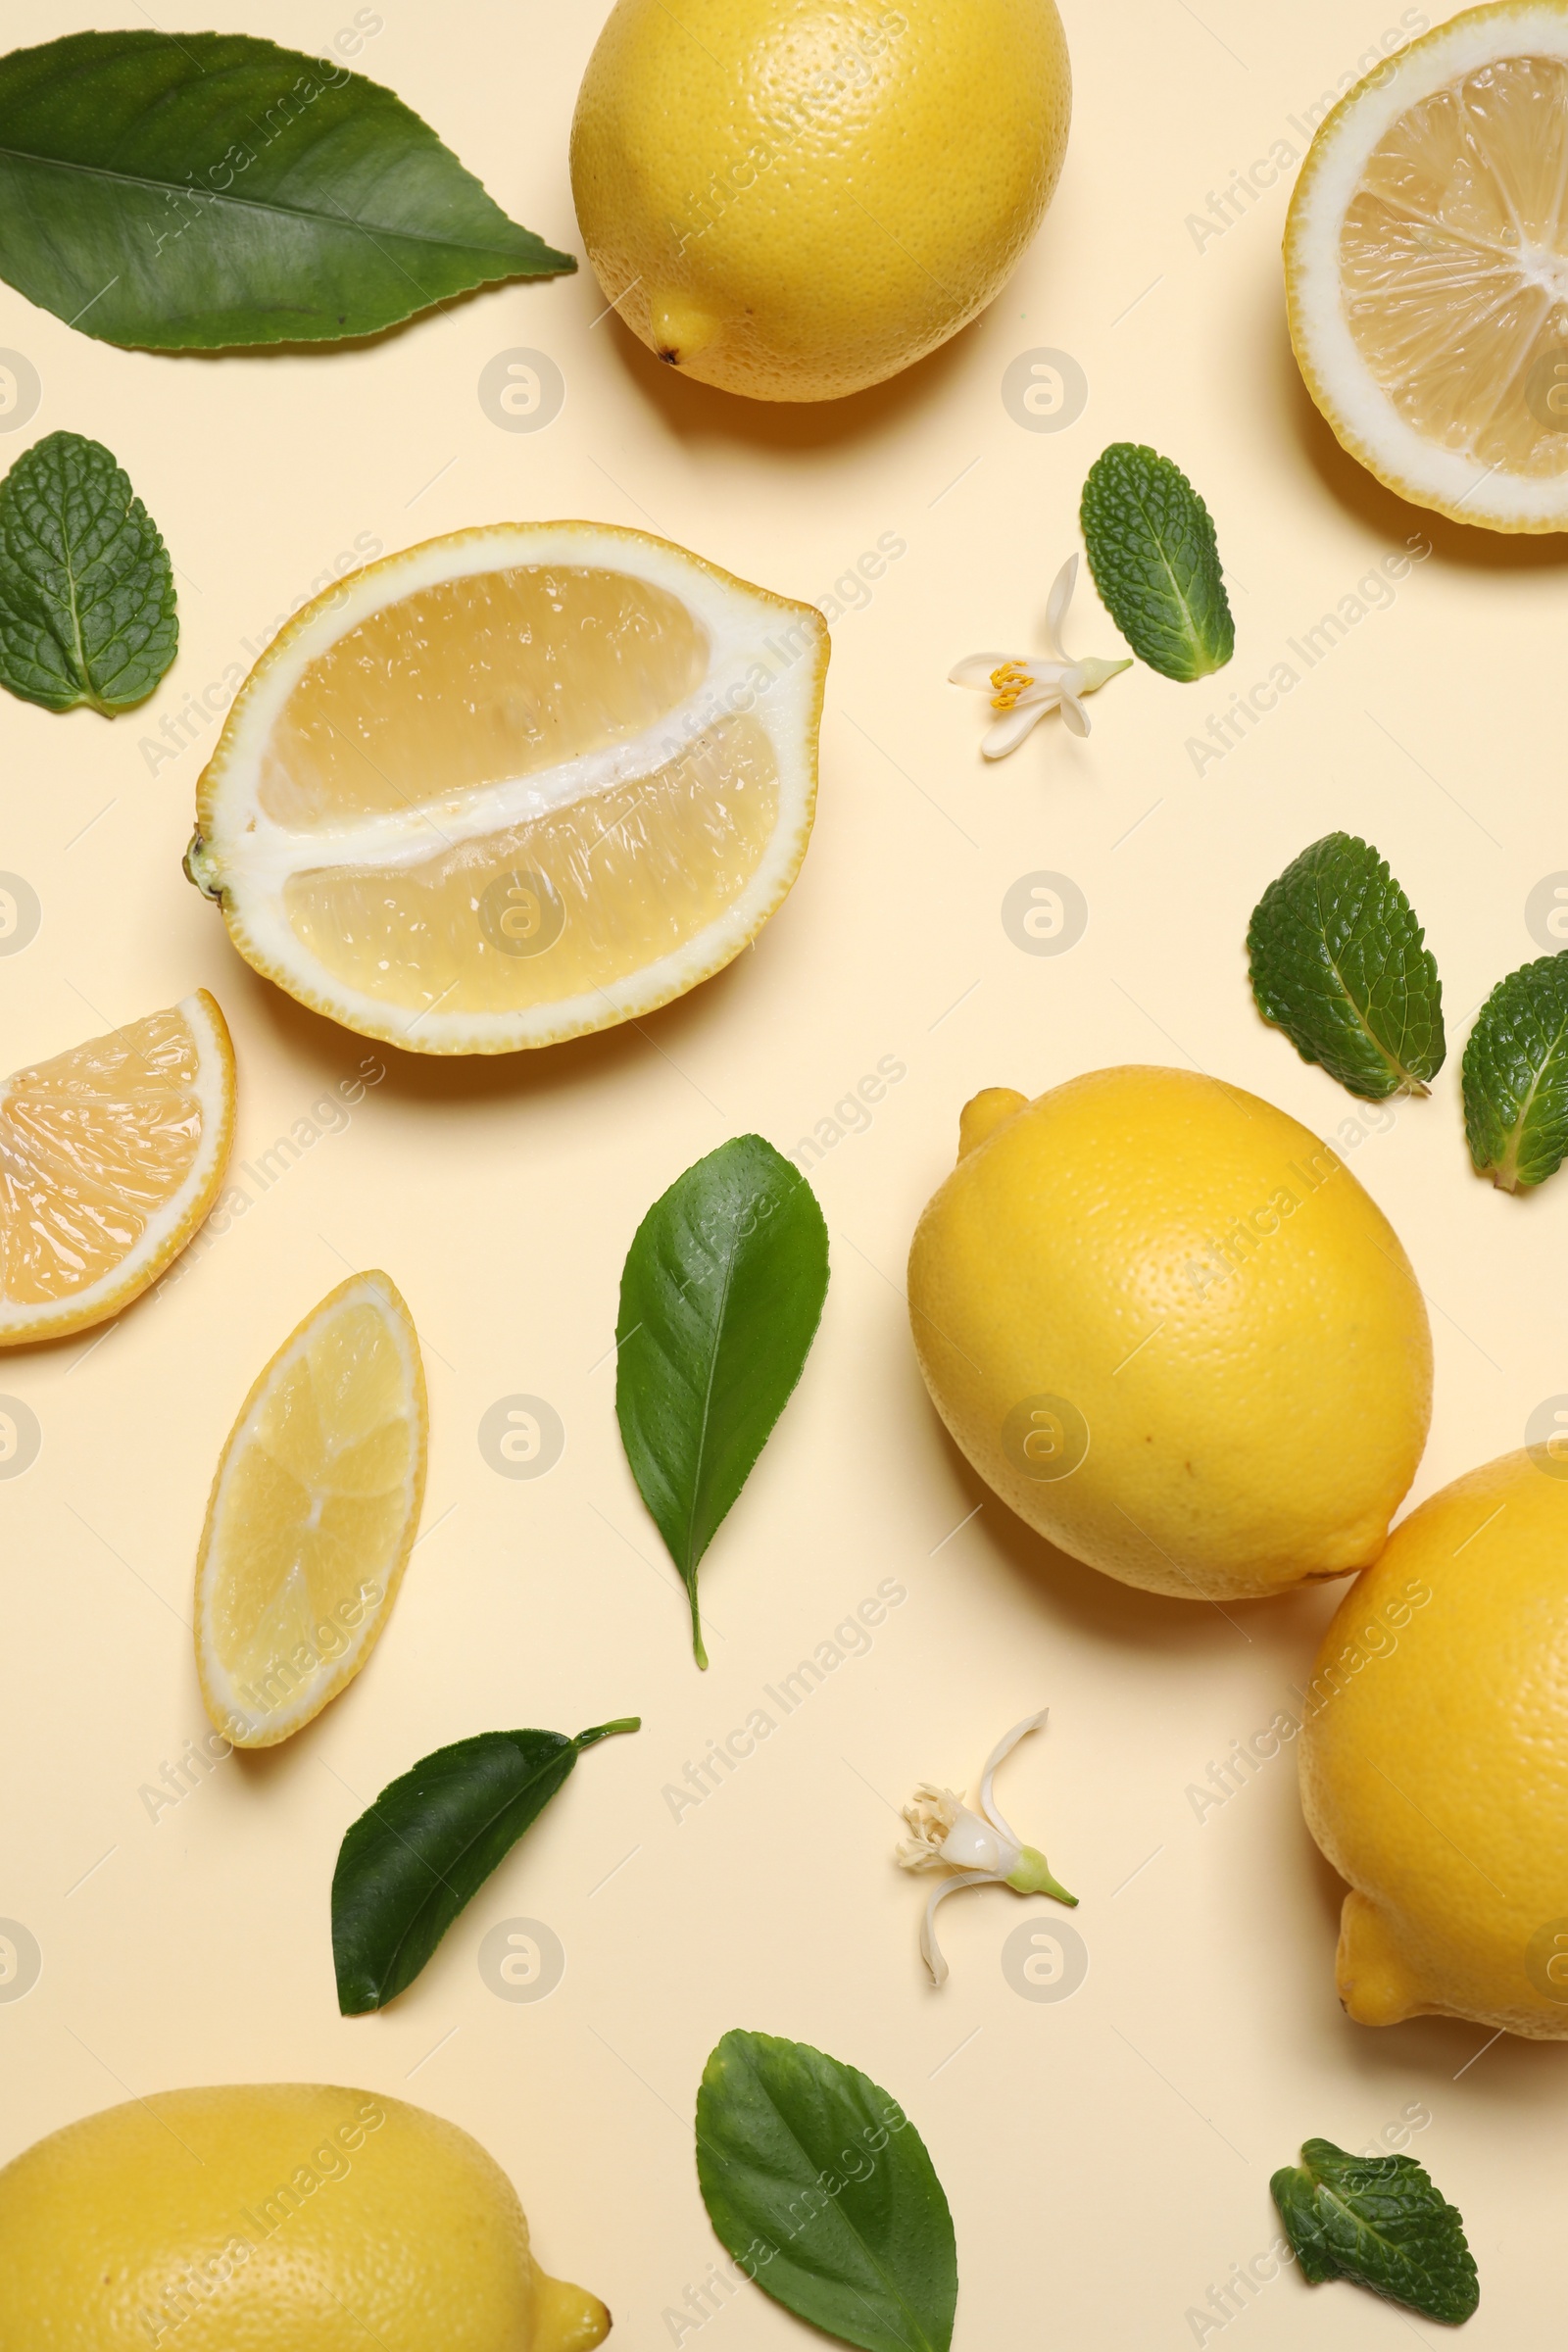 Photo of Many fresh ripe lemons with green leaves and flowers on beige background, flat lay